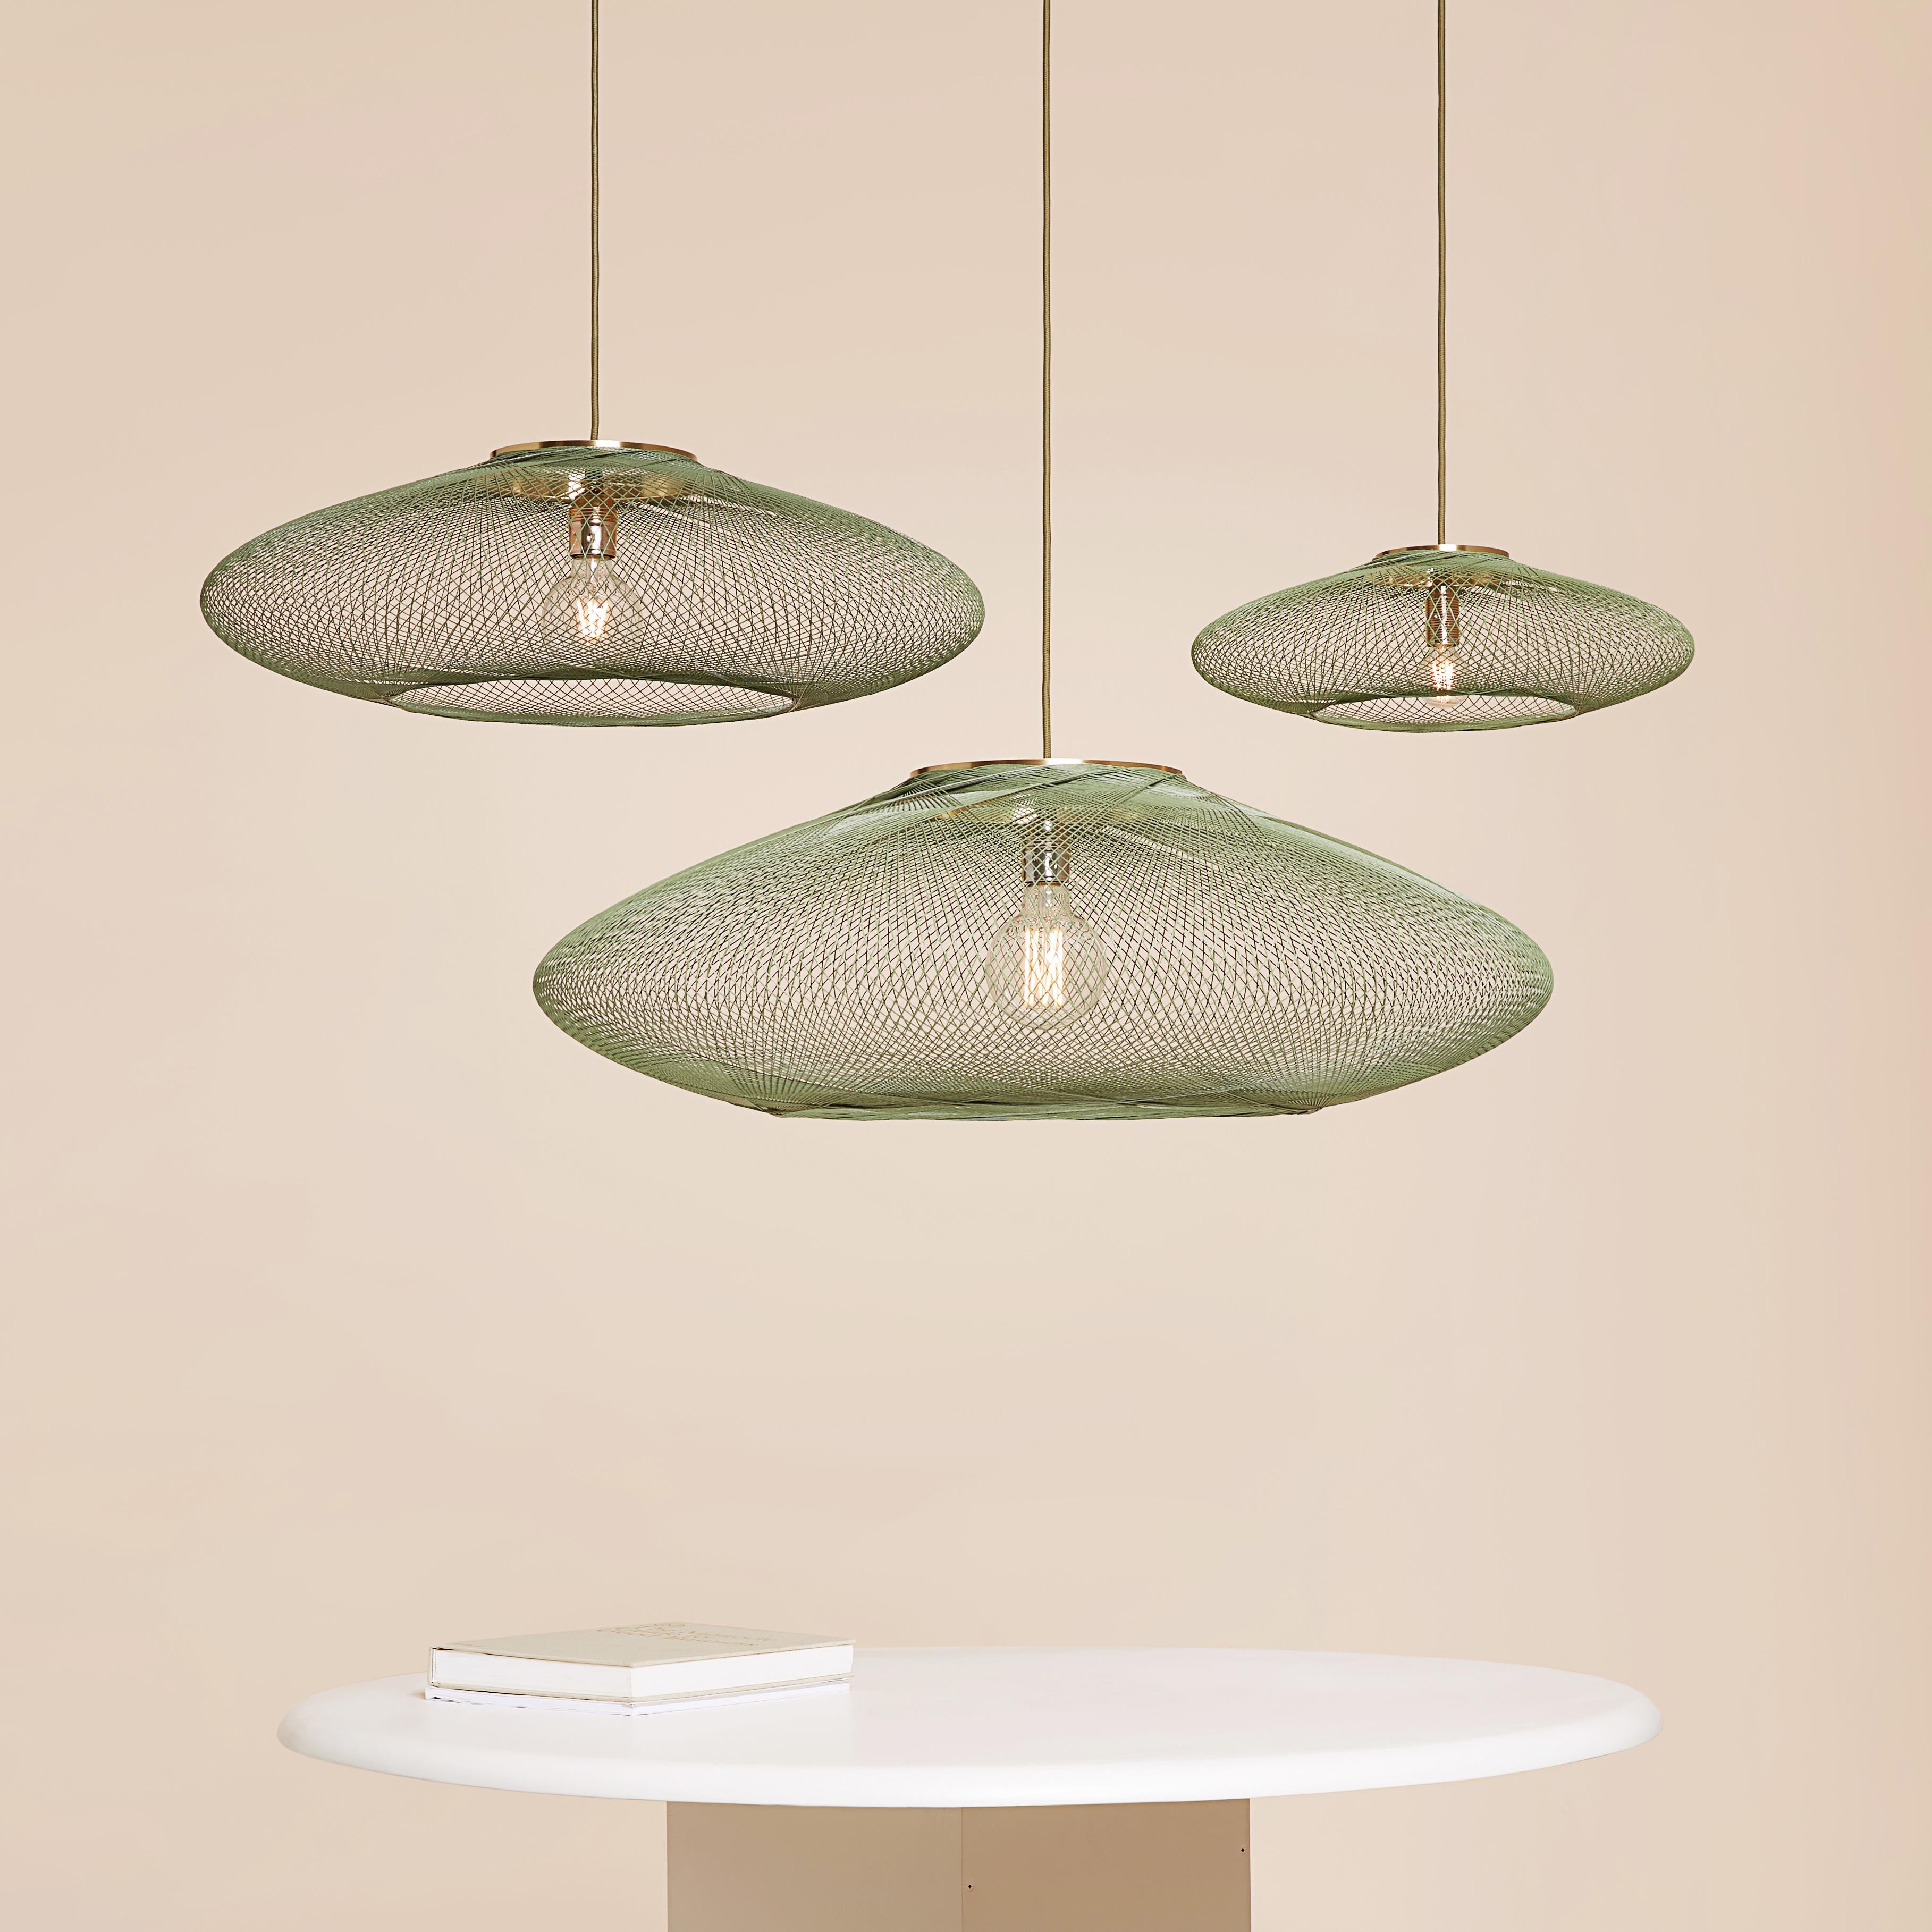 Medium Moss Green UFO pendant lamp by Atelier Robotiq
Dimensions: D 60 x H 18 cm
Materials: Resin-impregnated industrial fiber, brass.
Available with holder in brass/ black coated stainless steel.
Available in different colors, 3 sizes, and in